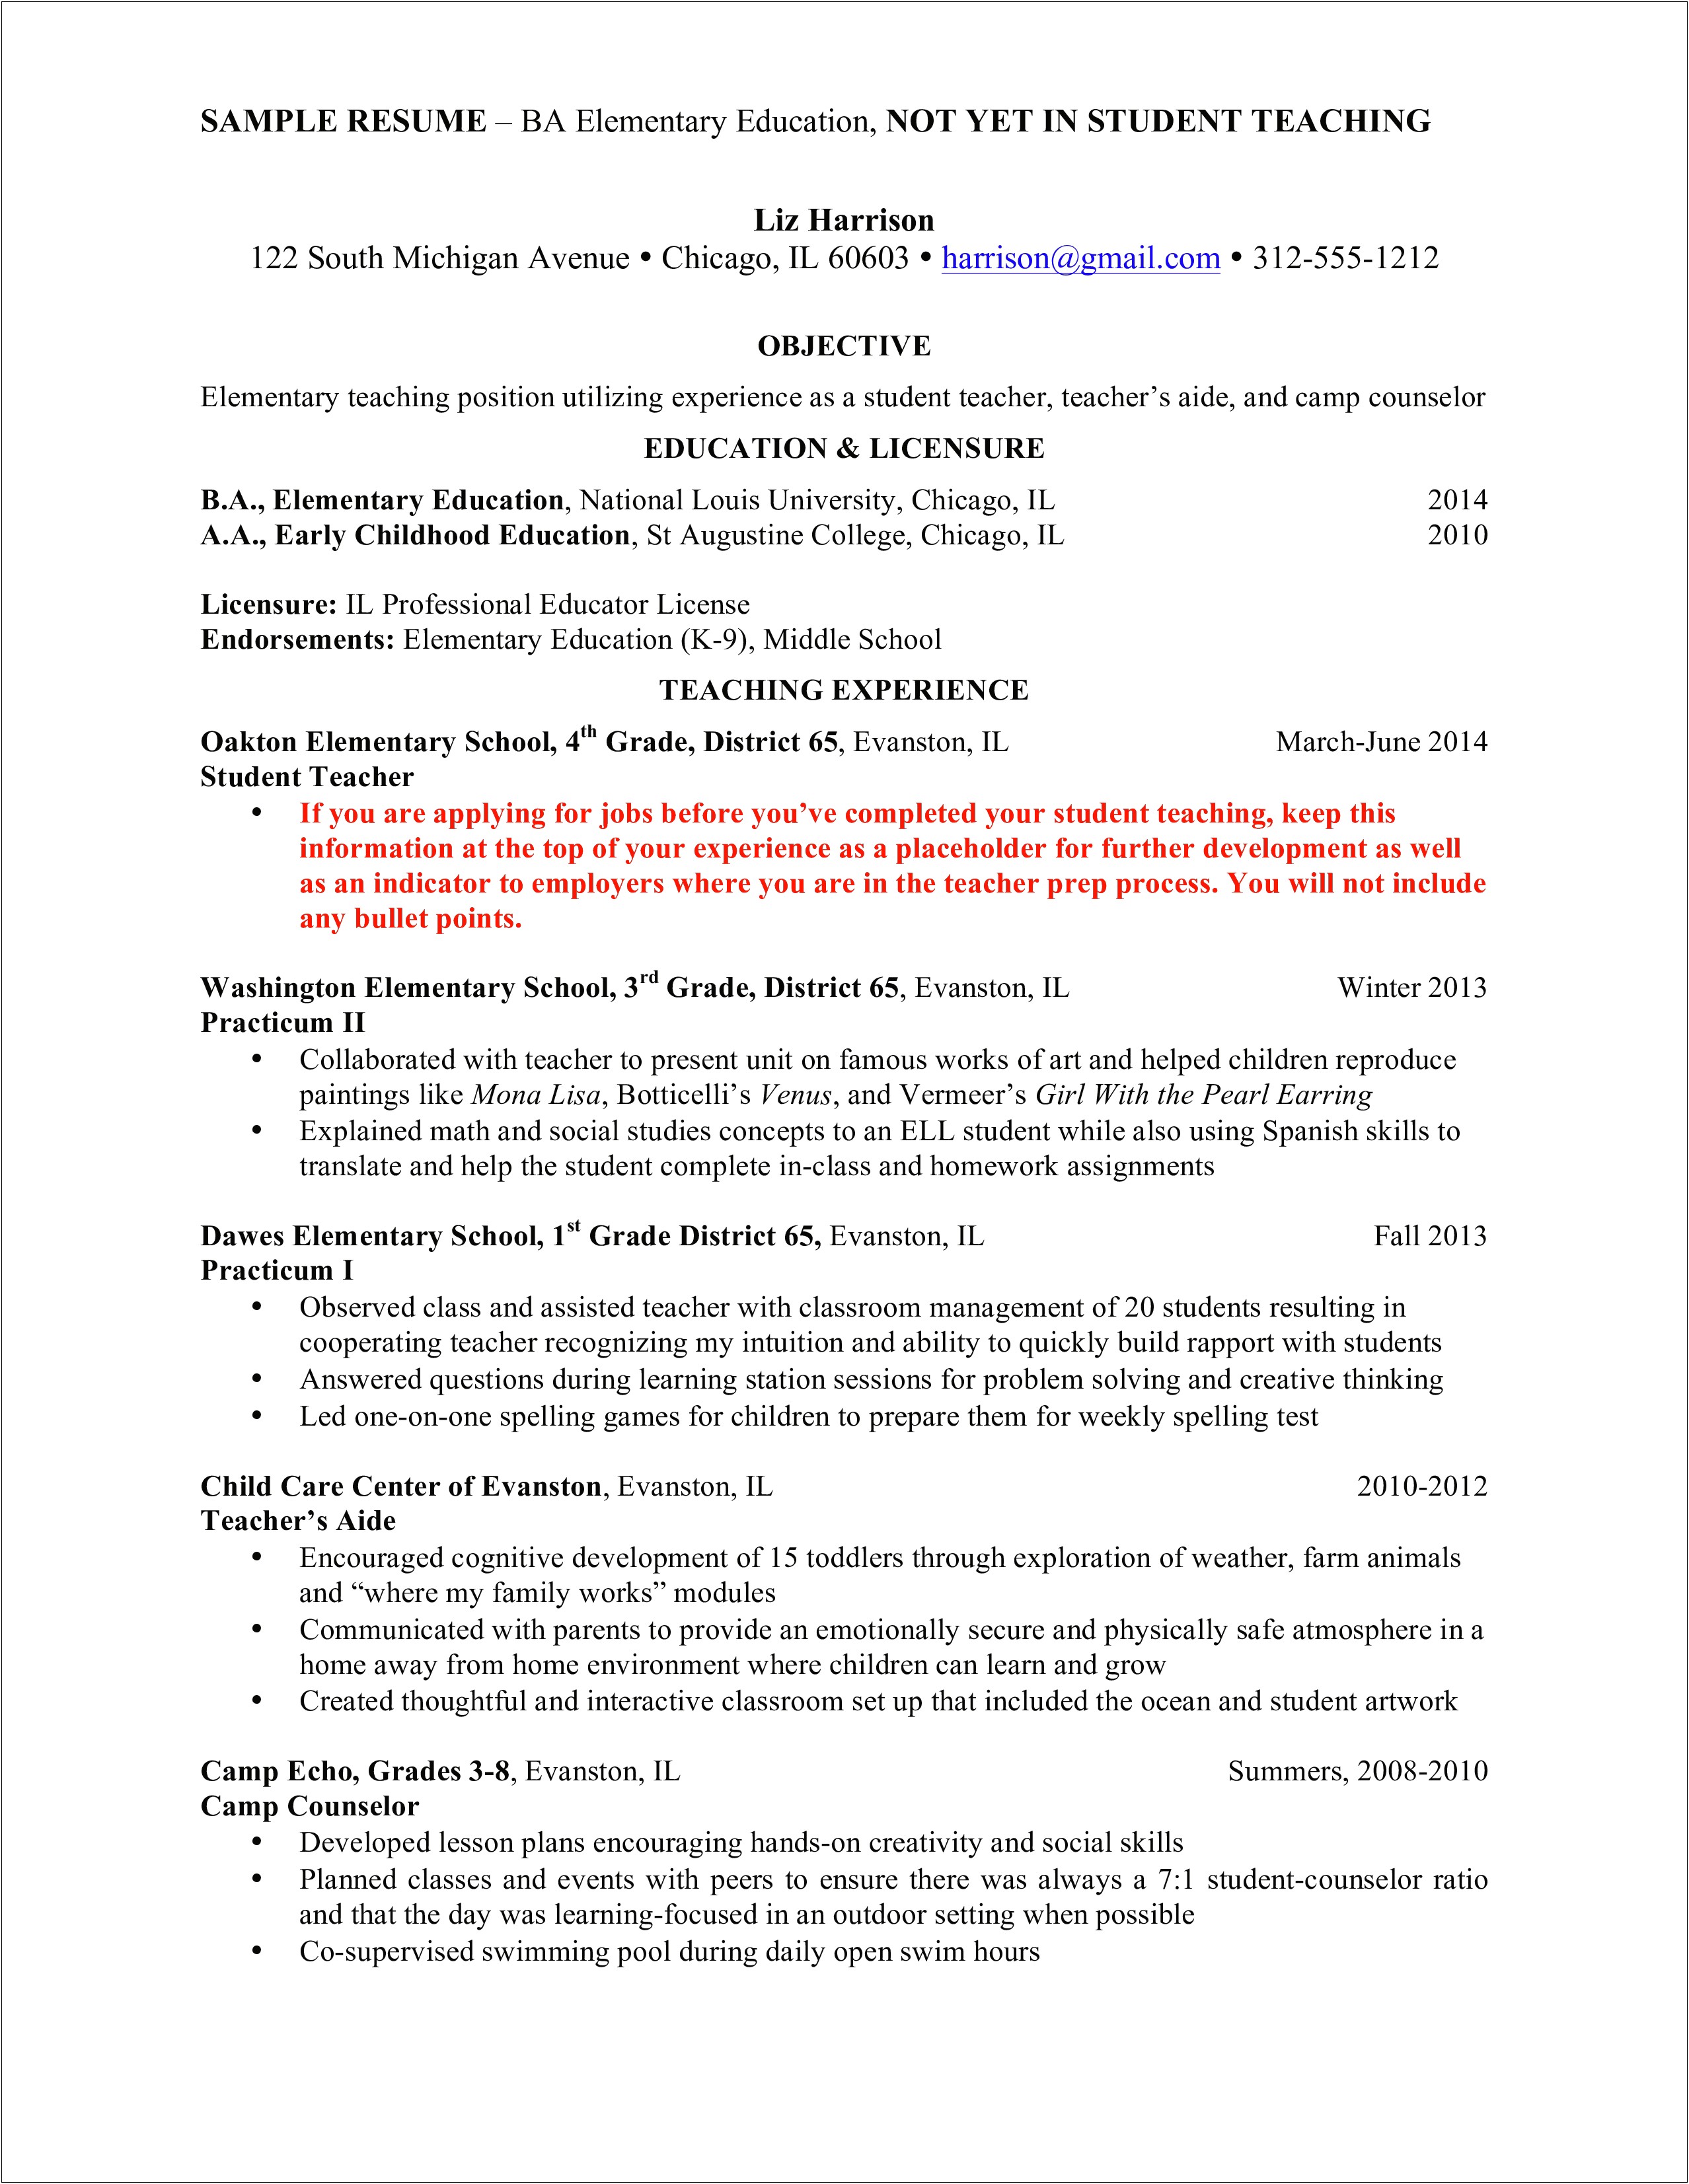 Sample Resume For Early Childhood